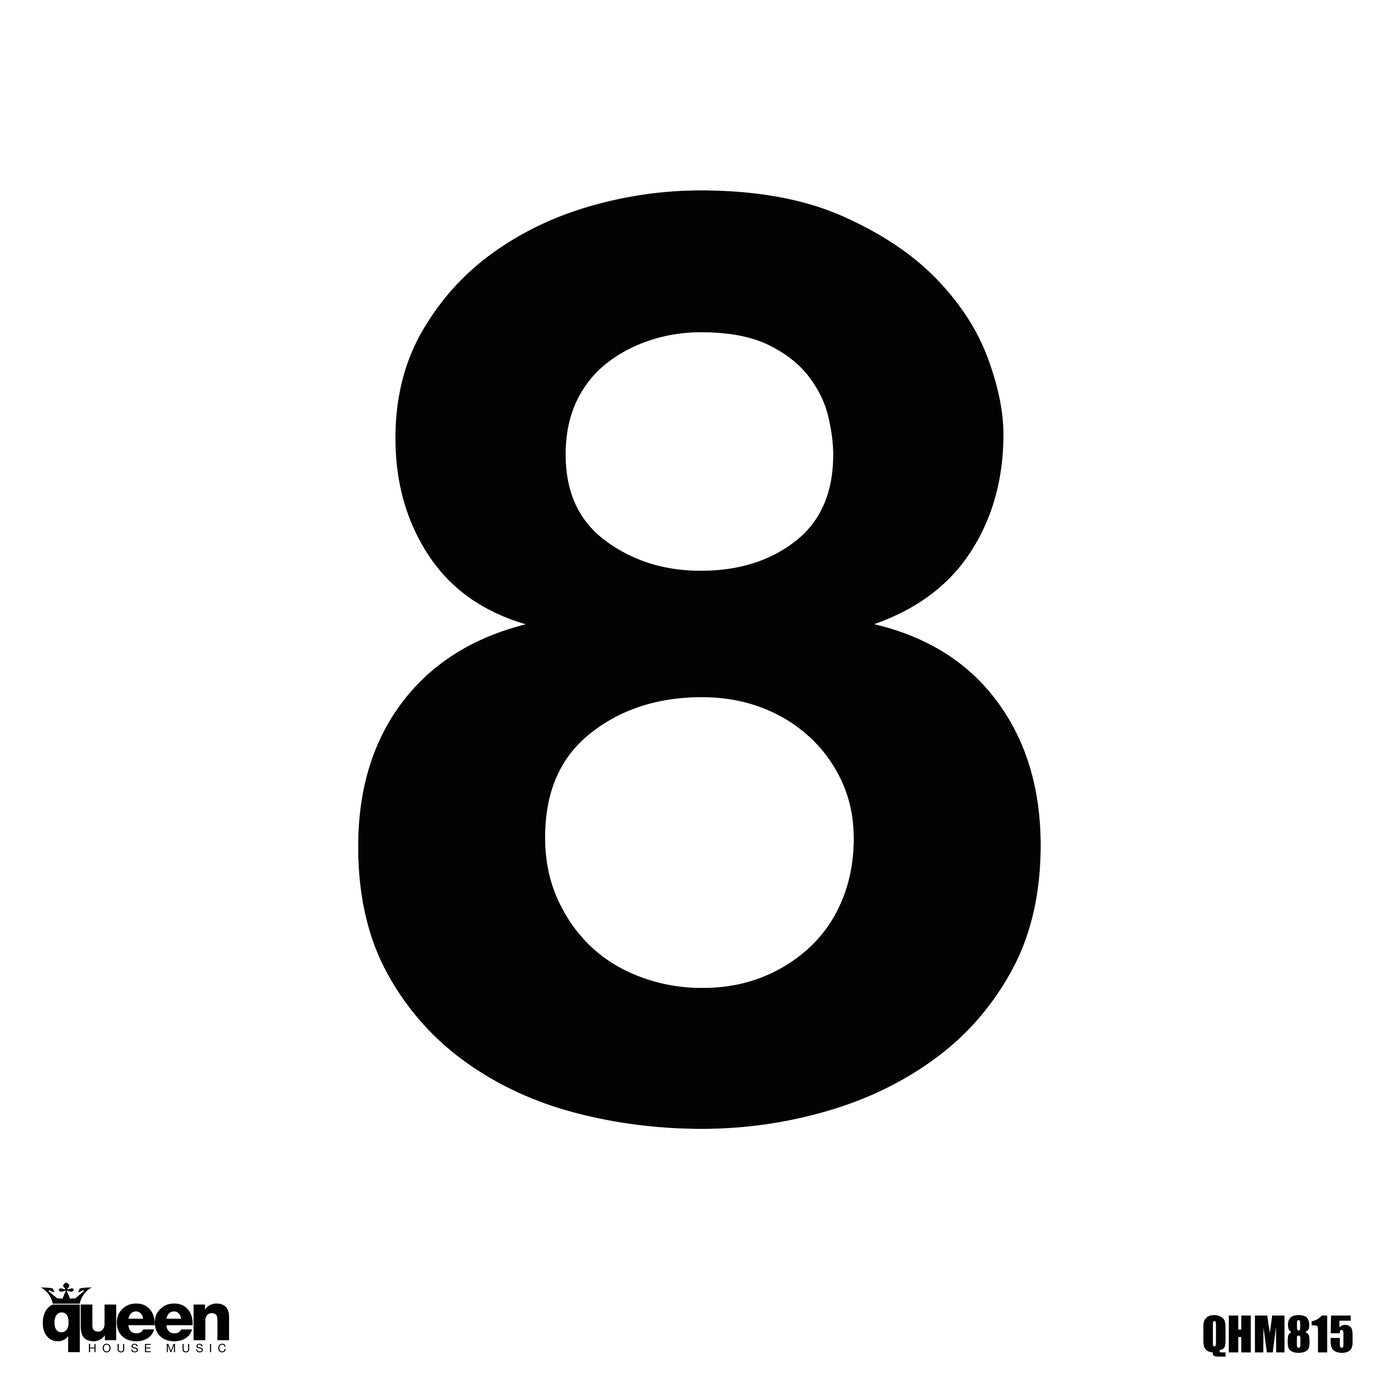 8 Years of Queen House Music